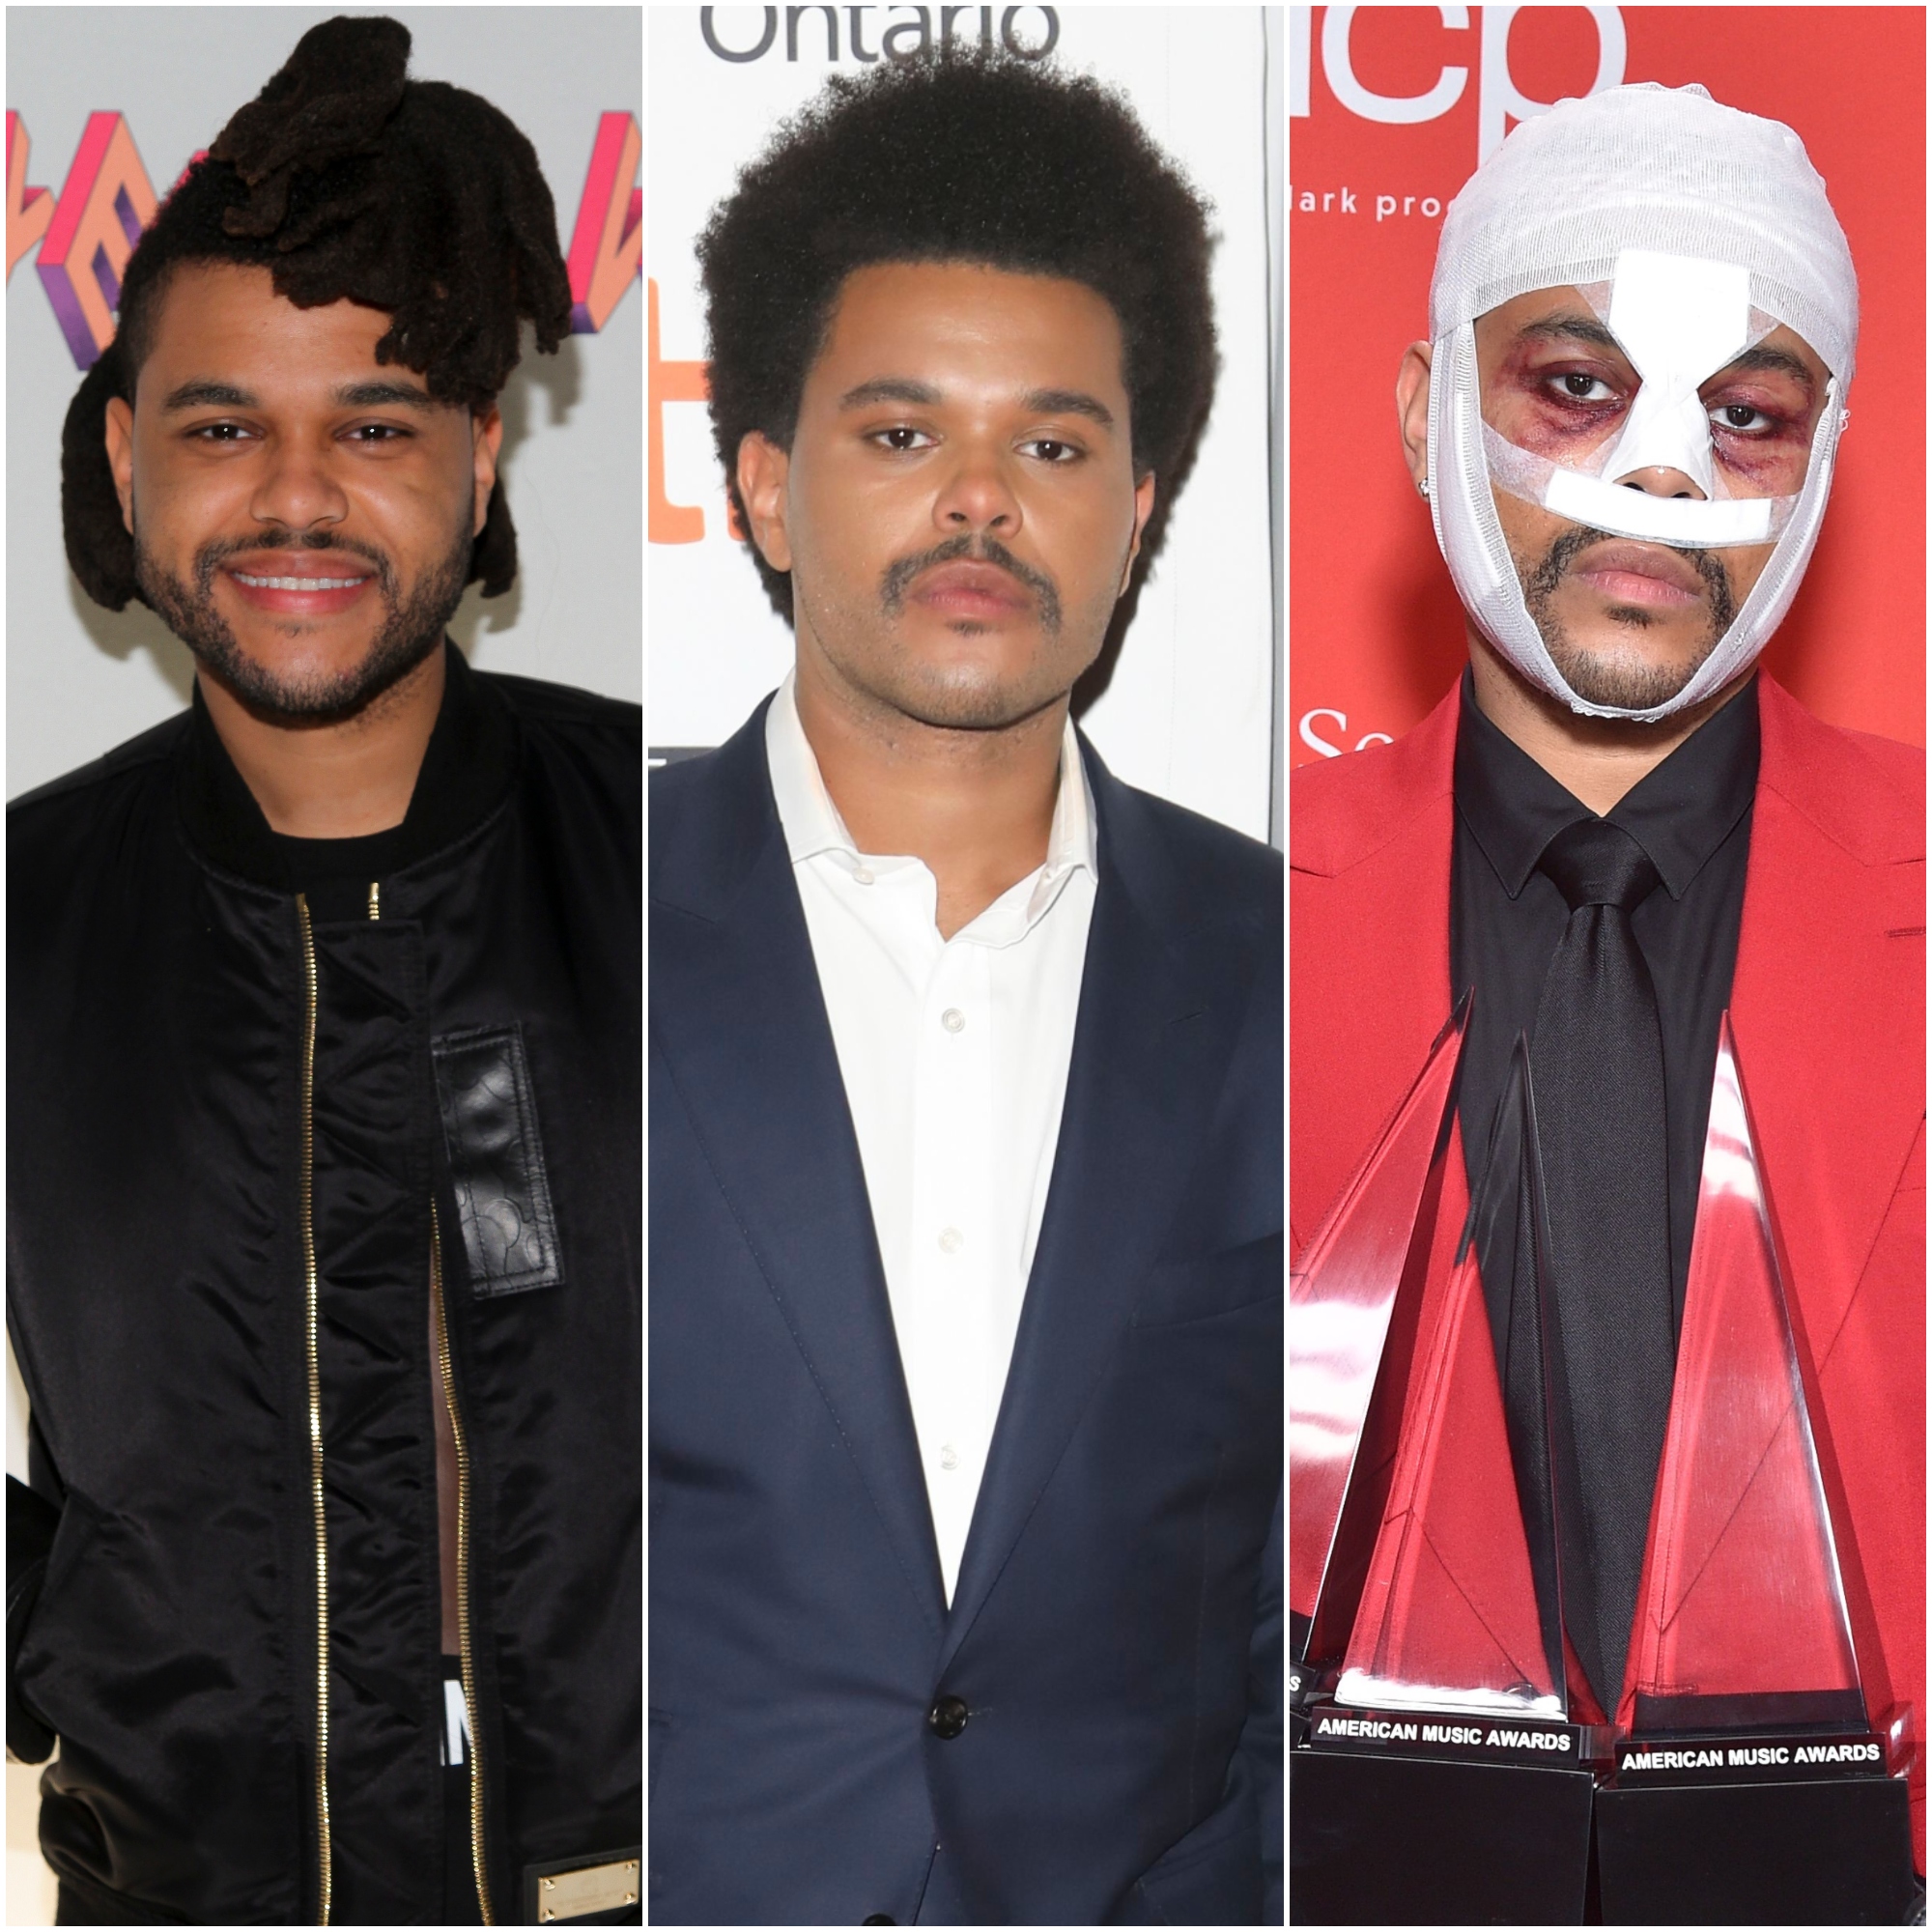 TMZ reporter asks The Weeknd if he washes his dreadlocks, The Independent